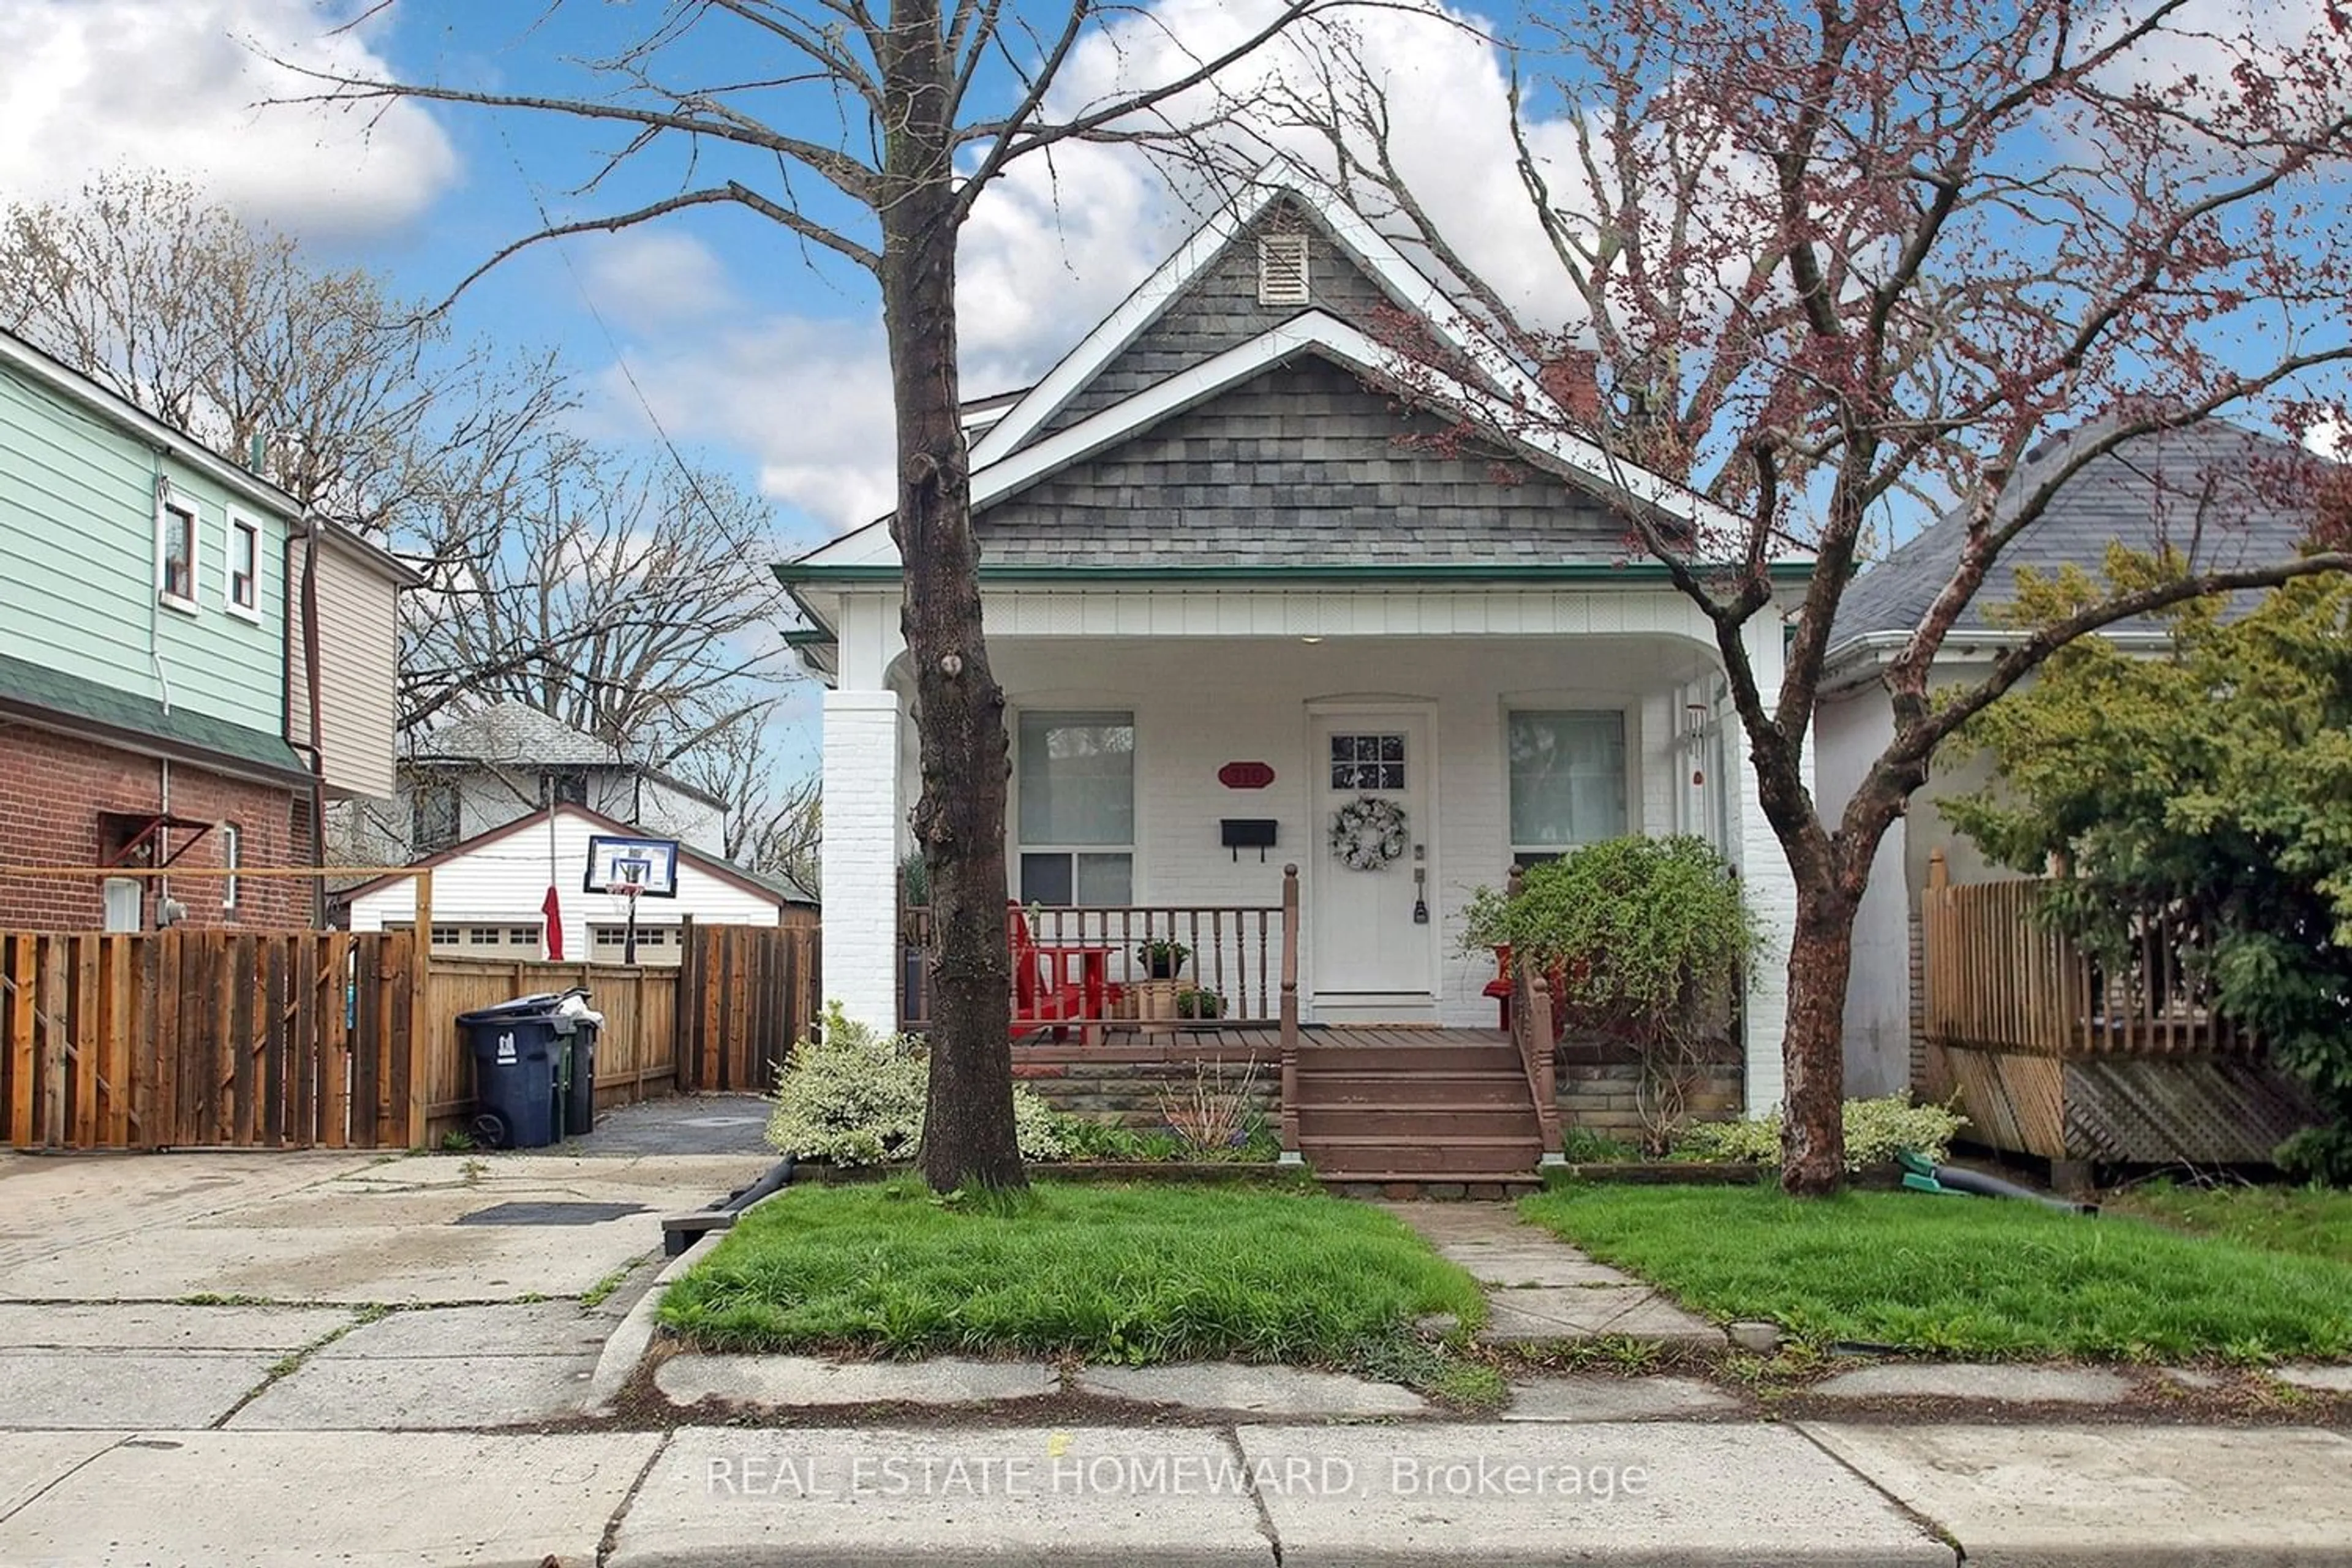 Frontside or backside of a home for 310 Lumsden Ave, Toronto Ontario M4C 2L1